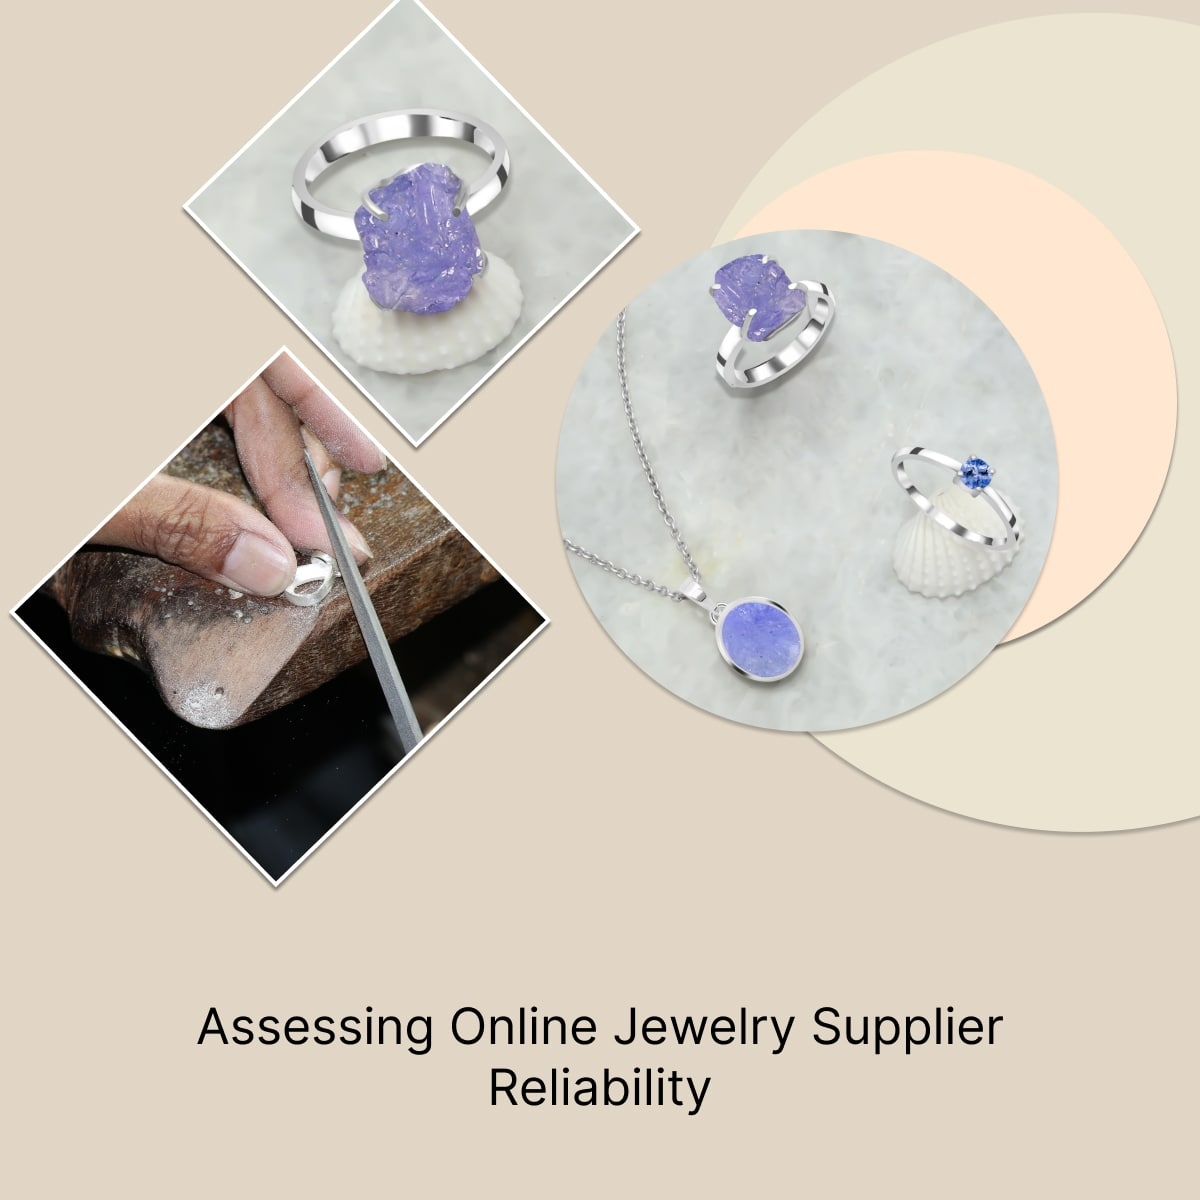 Things to Check in an Online Jewelry Supplier